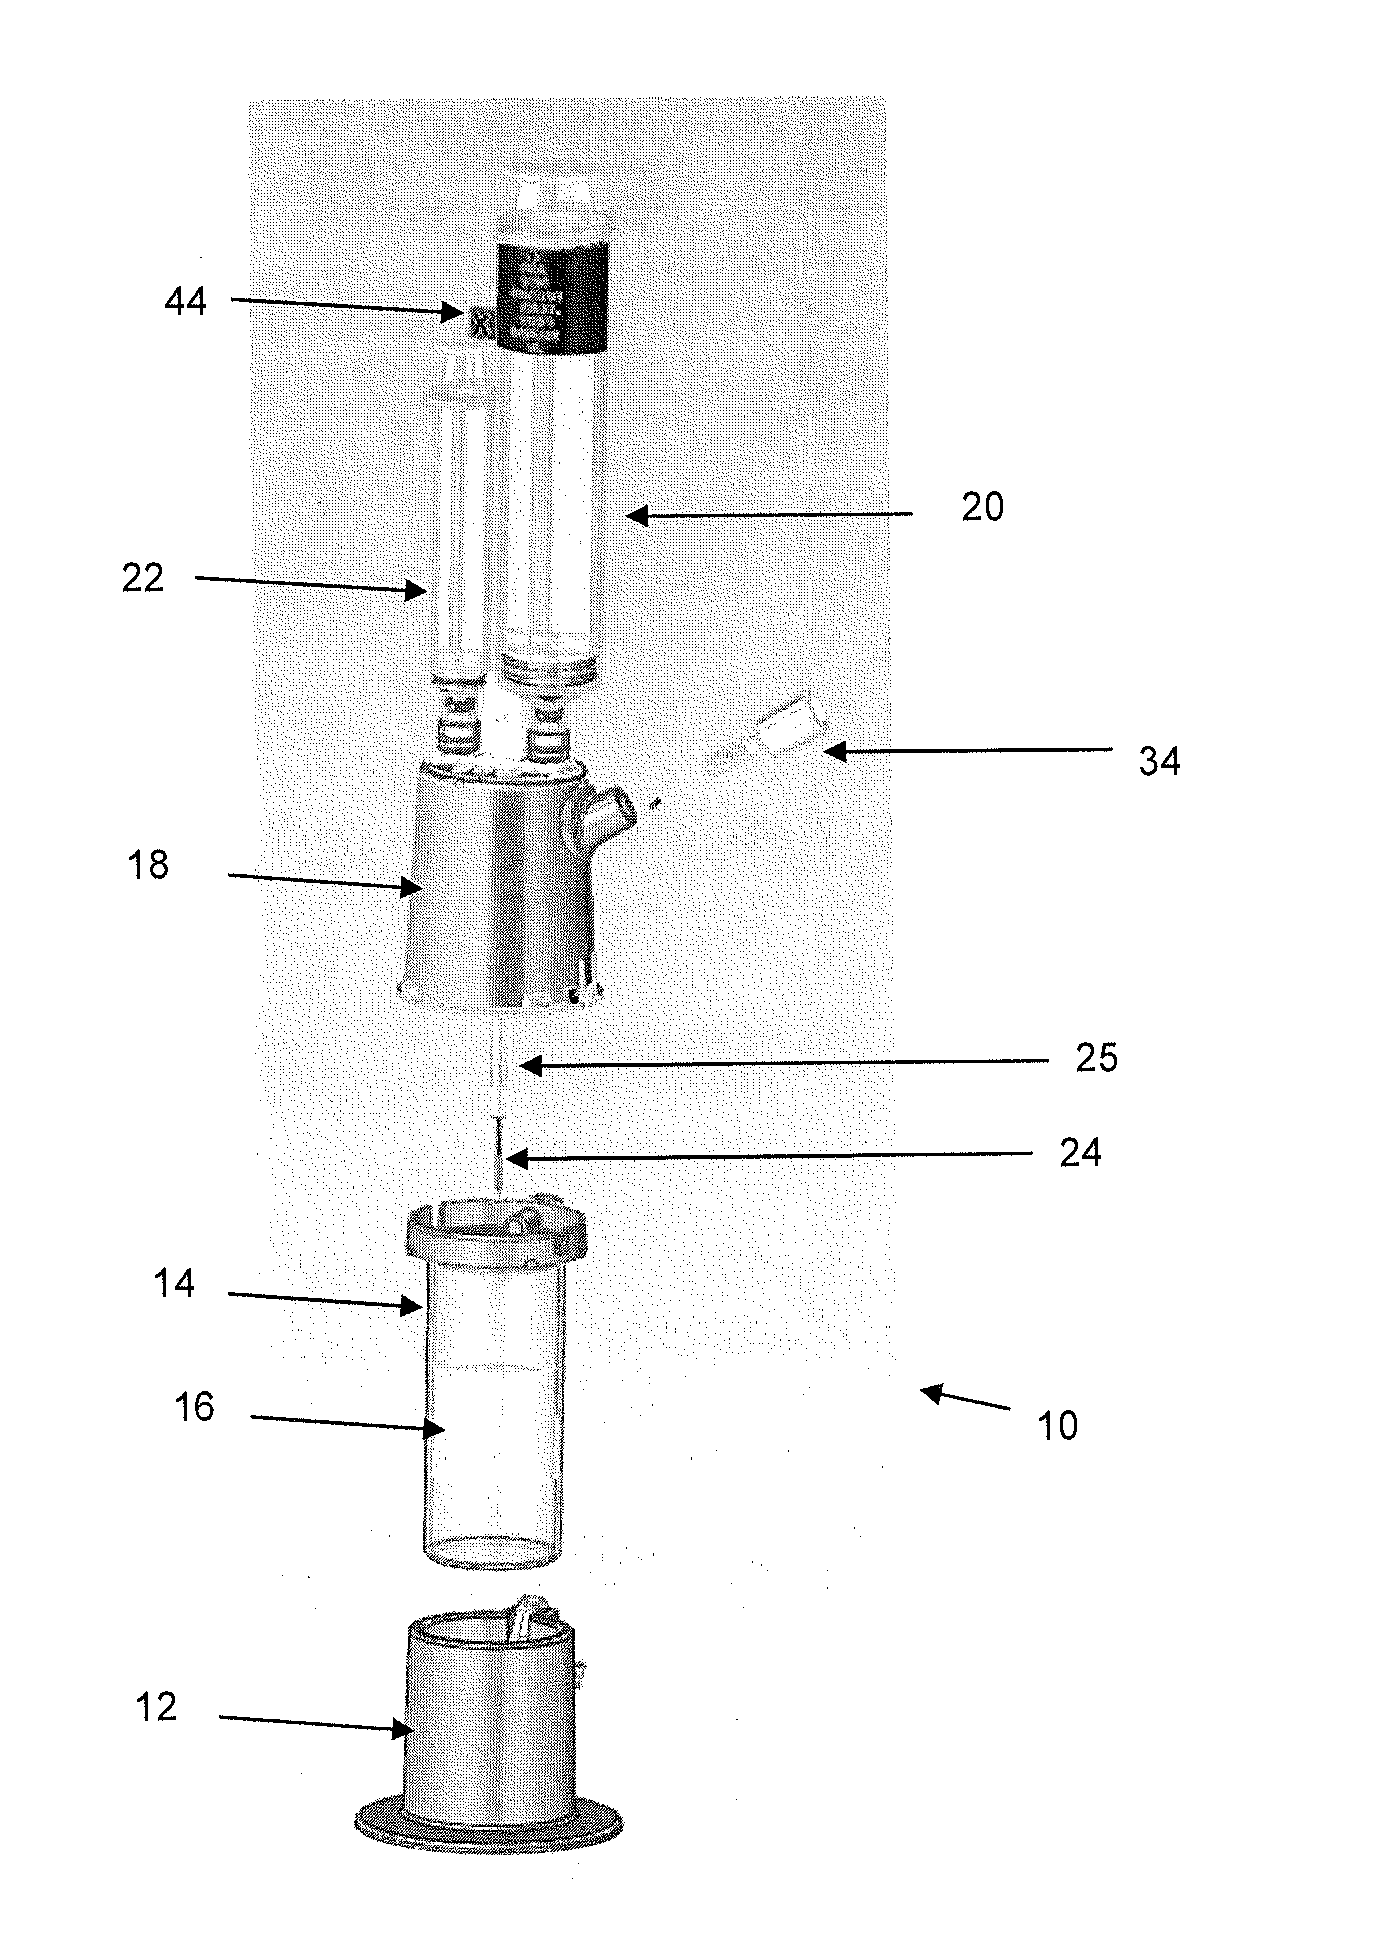 Cell concentration devices and methods